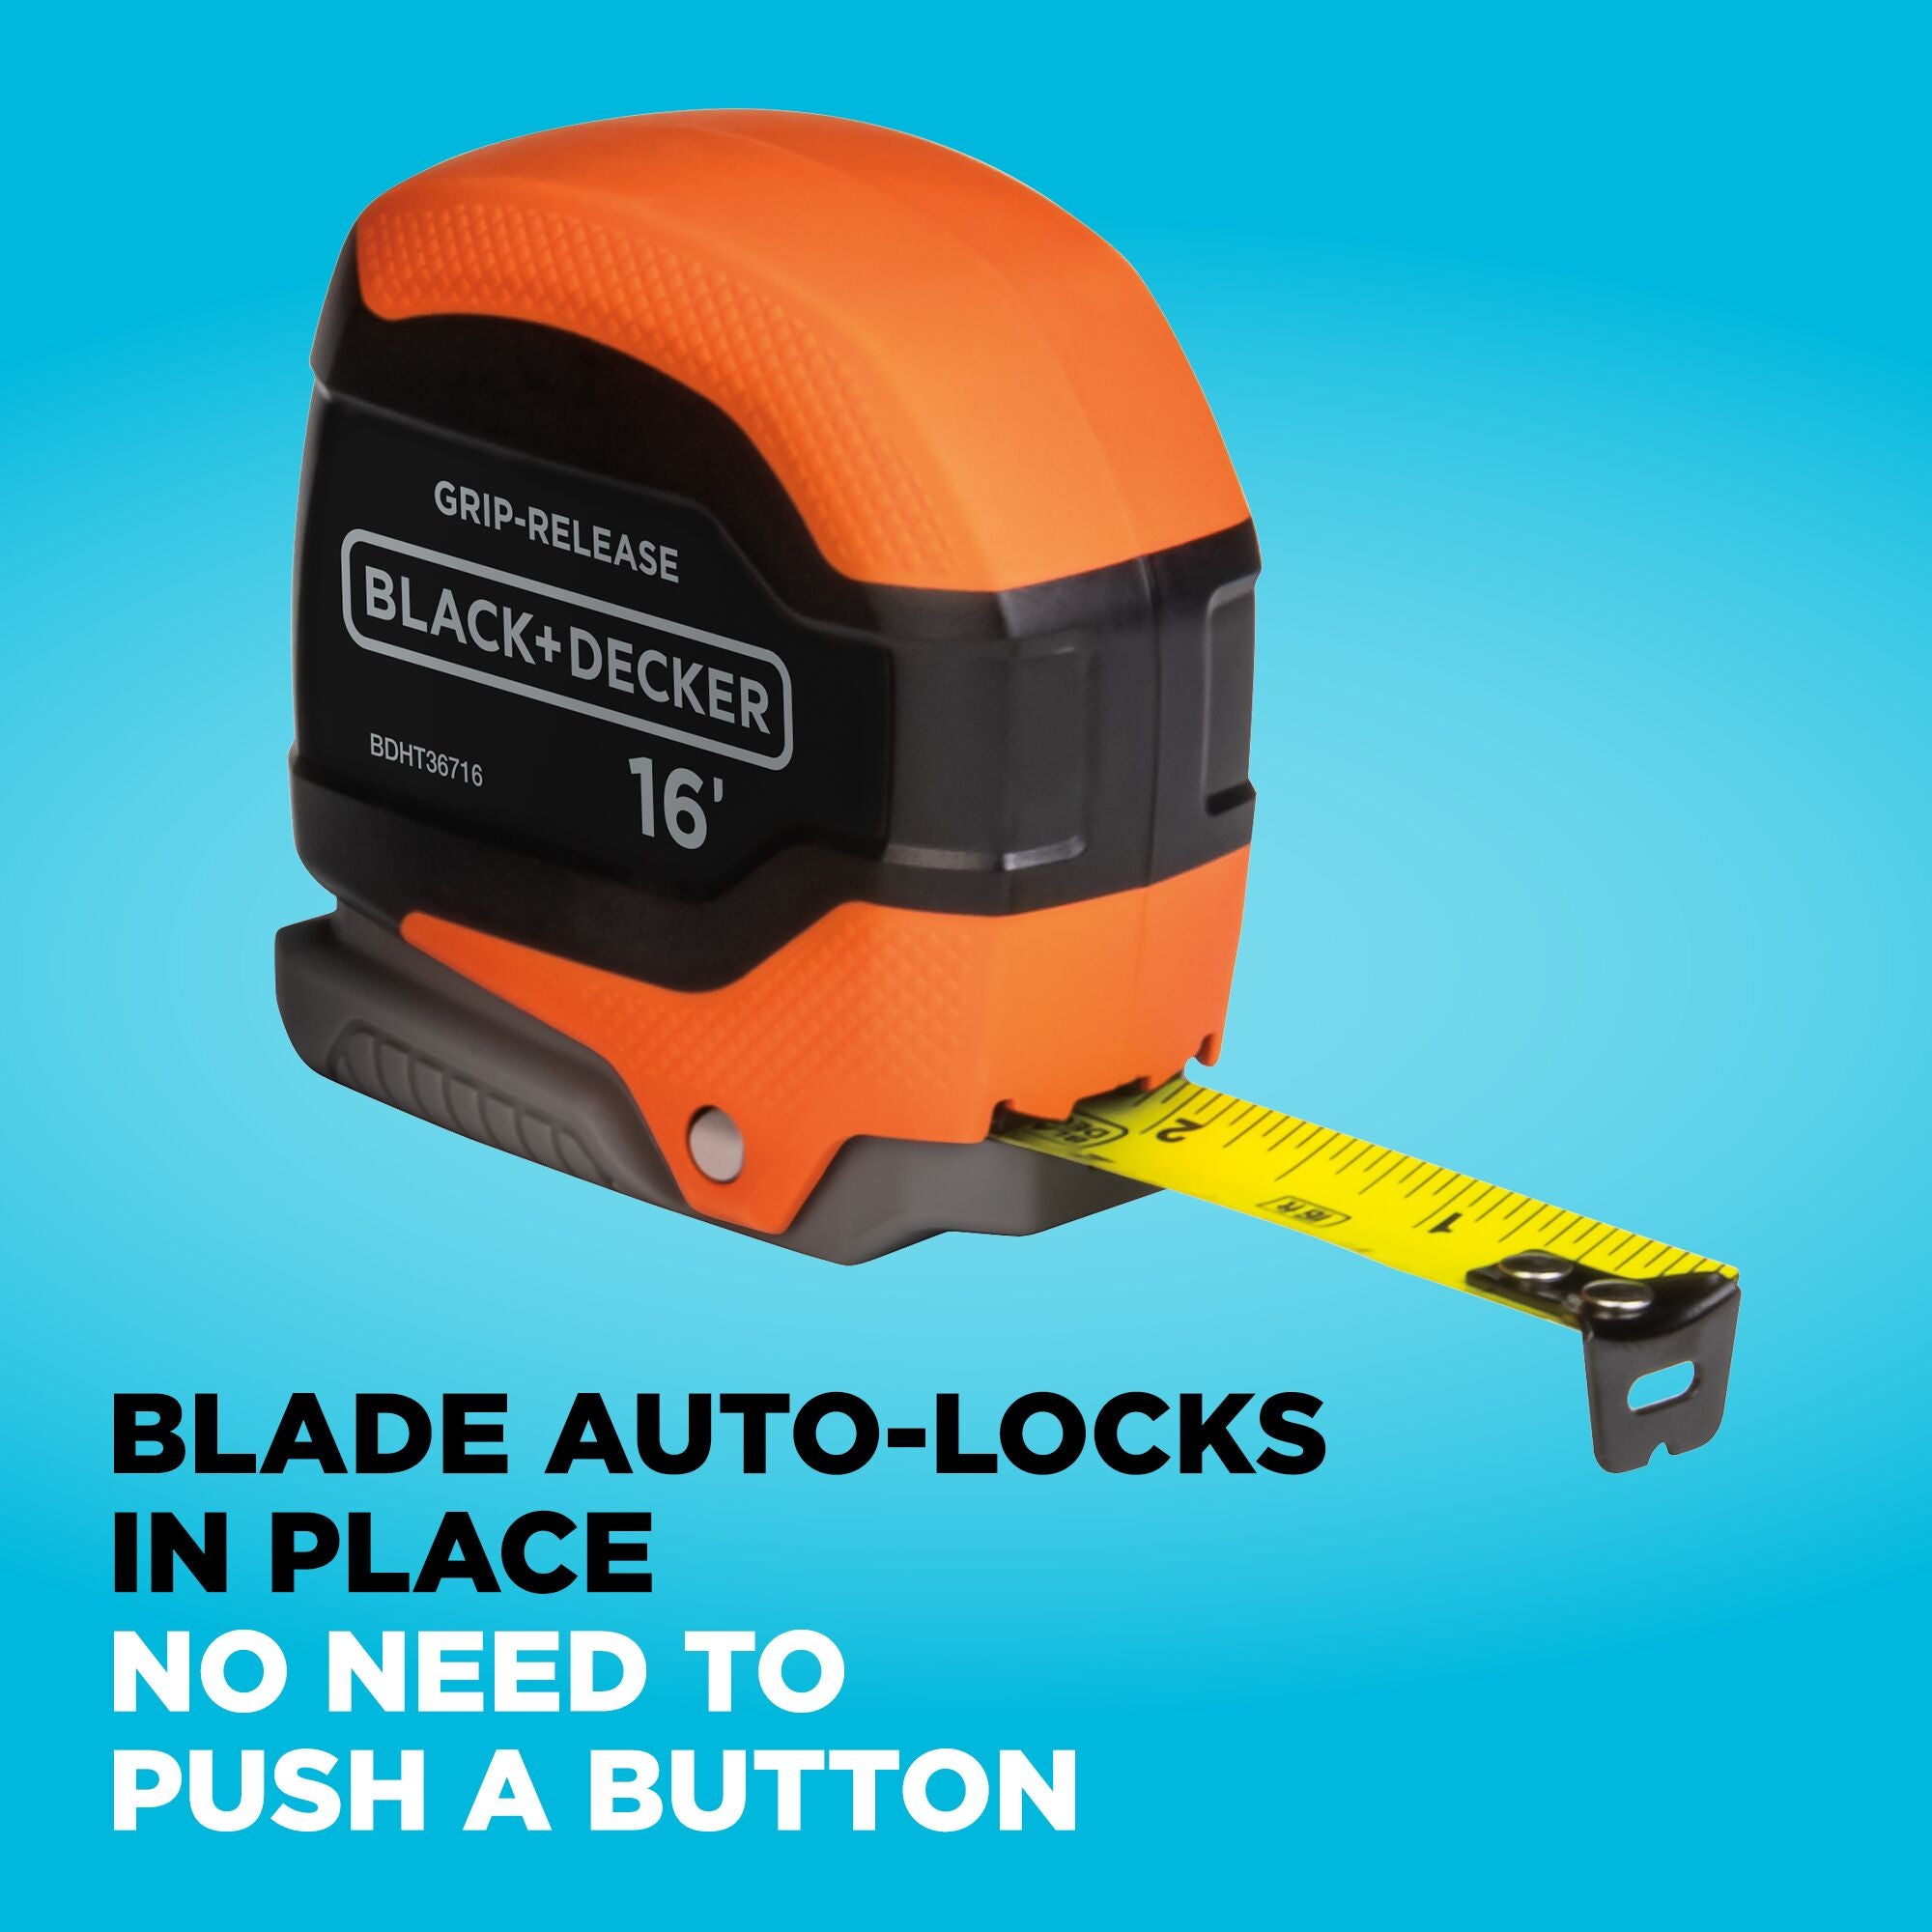 BLACK+DECKER 12 ft. and 16 ft. Tape Measure Bundle blade auto-locks in place